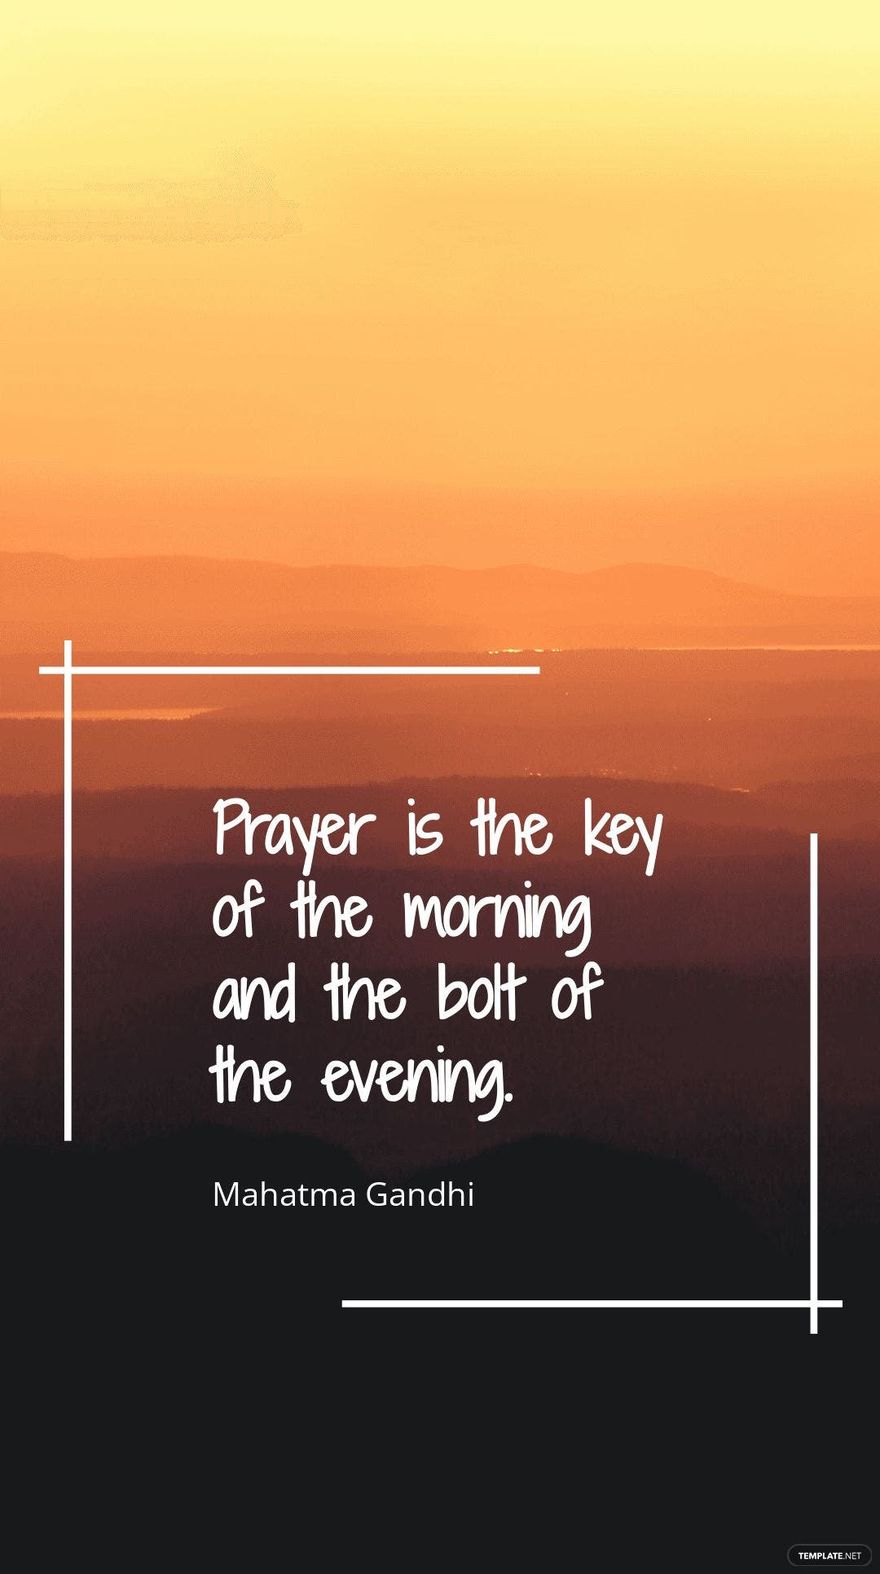 Mahatma Gandhi - Prayer is the key of the morning and the bolt of the evening.